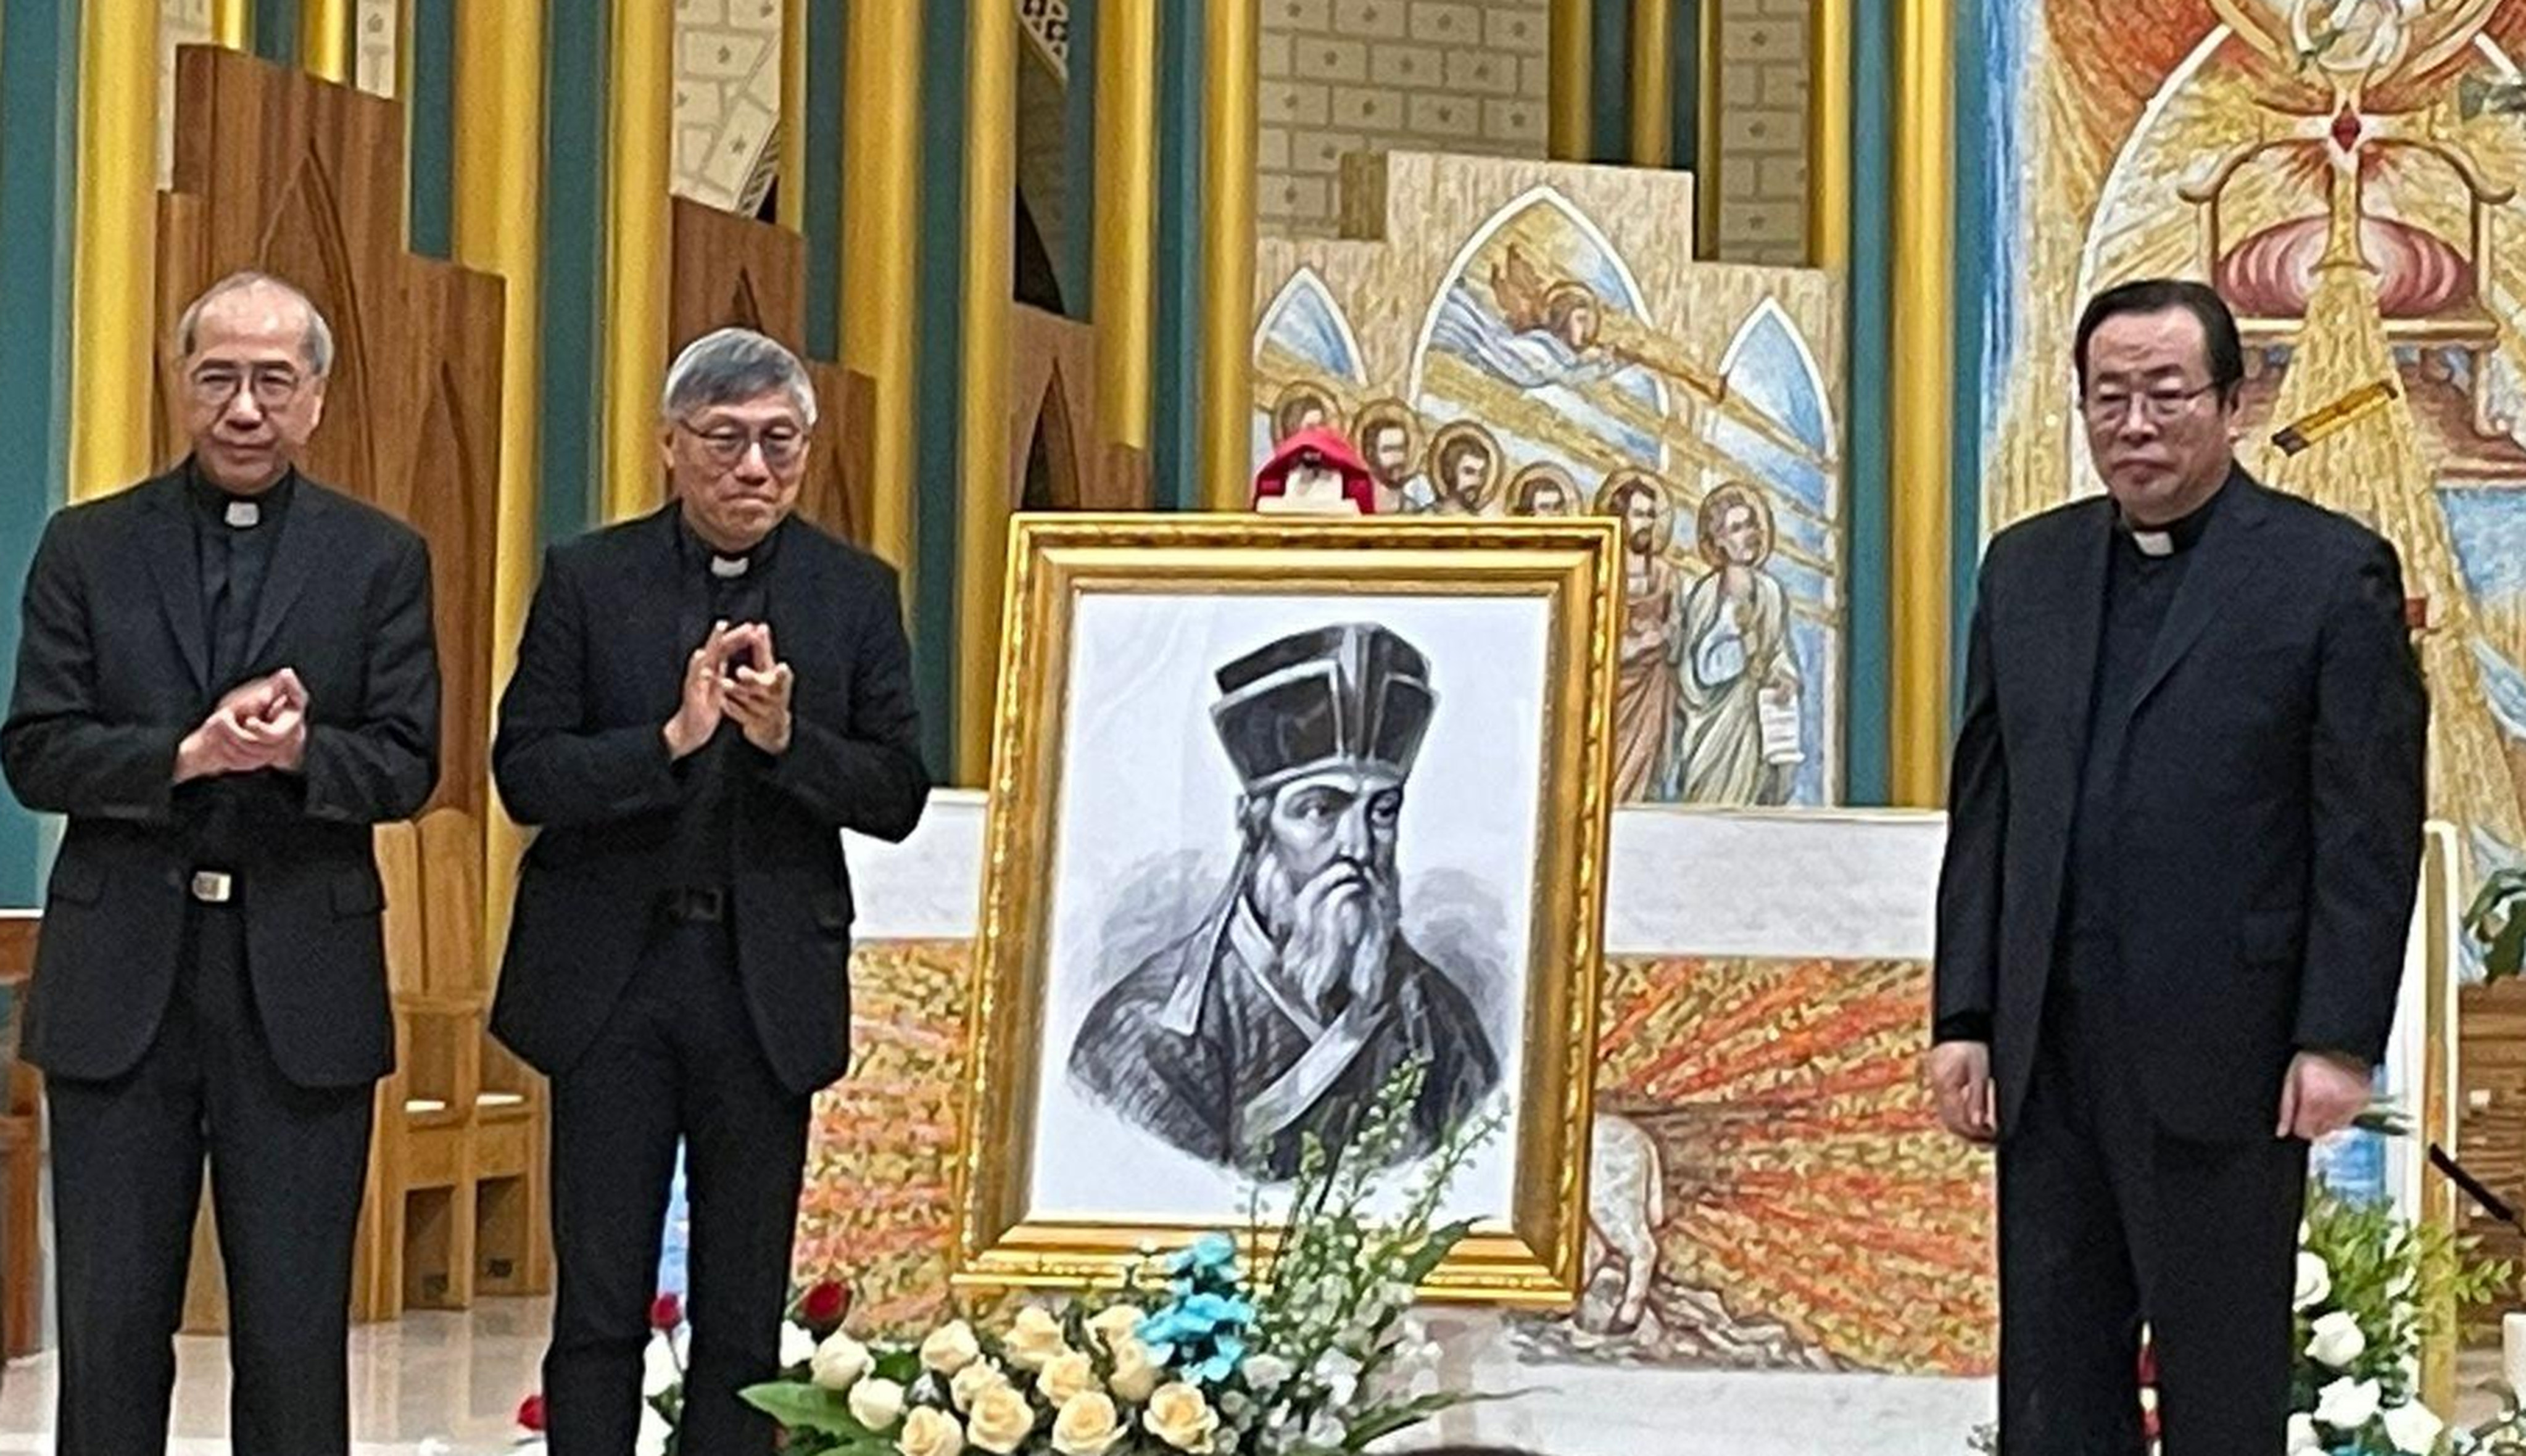 (From left) Auxiliary Bishop Joseph Ha, Bishop Stephen Chow and Bishop Joseph Li in Beijing. The portrait is of Jesuit missionary Matteo Ricci. Photo: Handout 